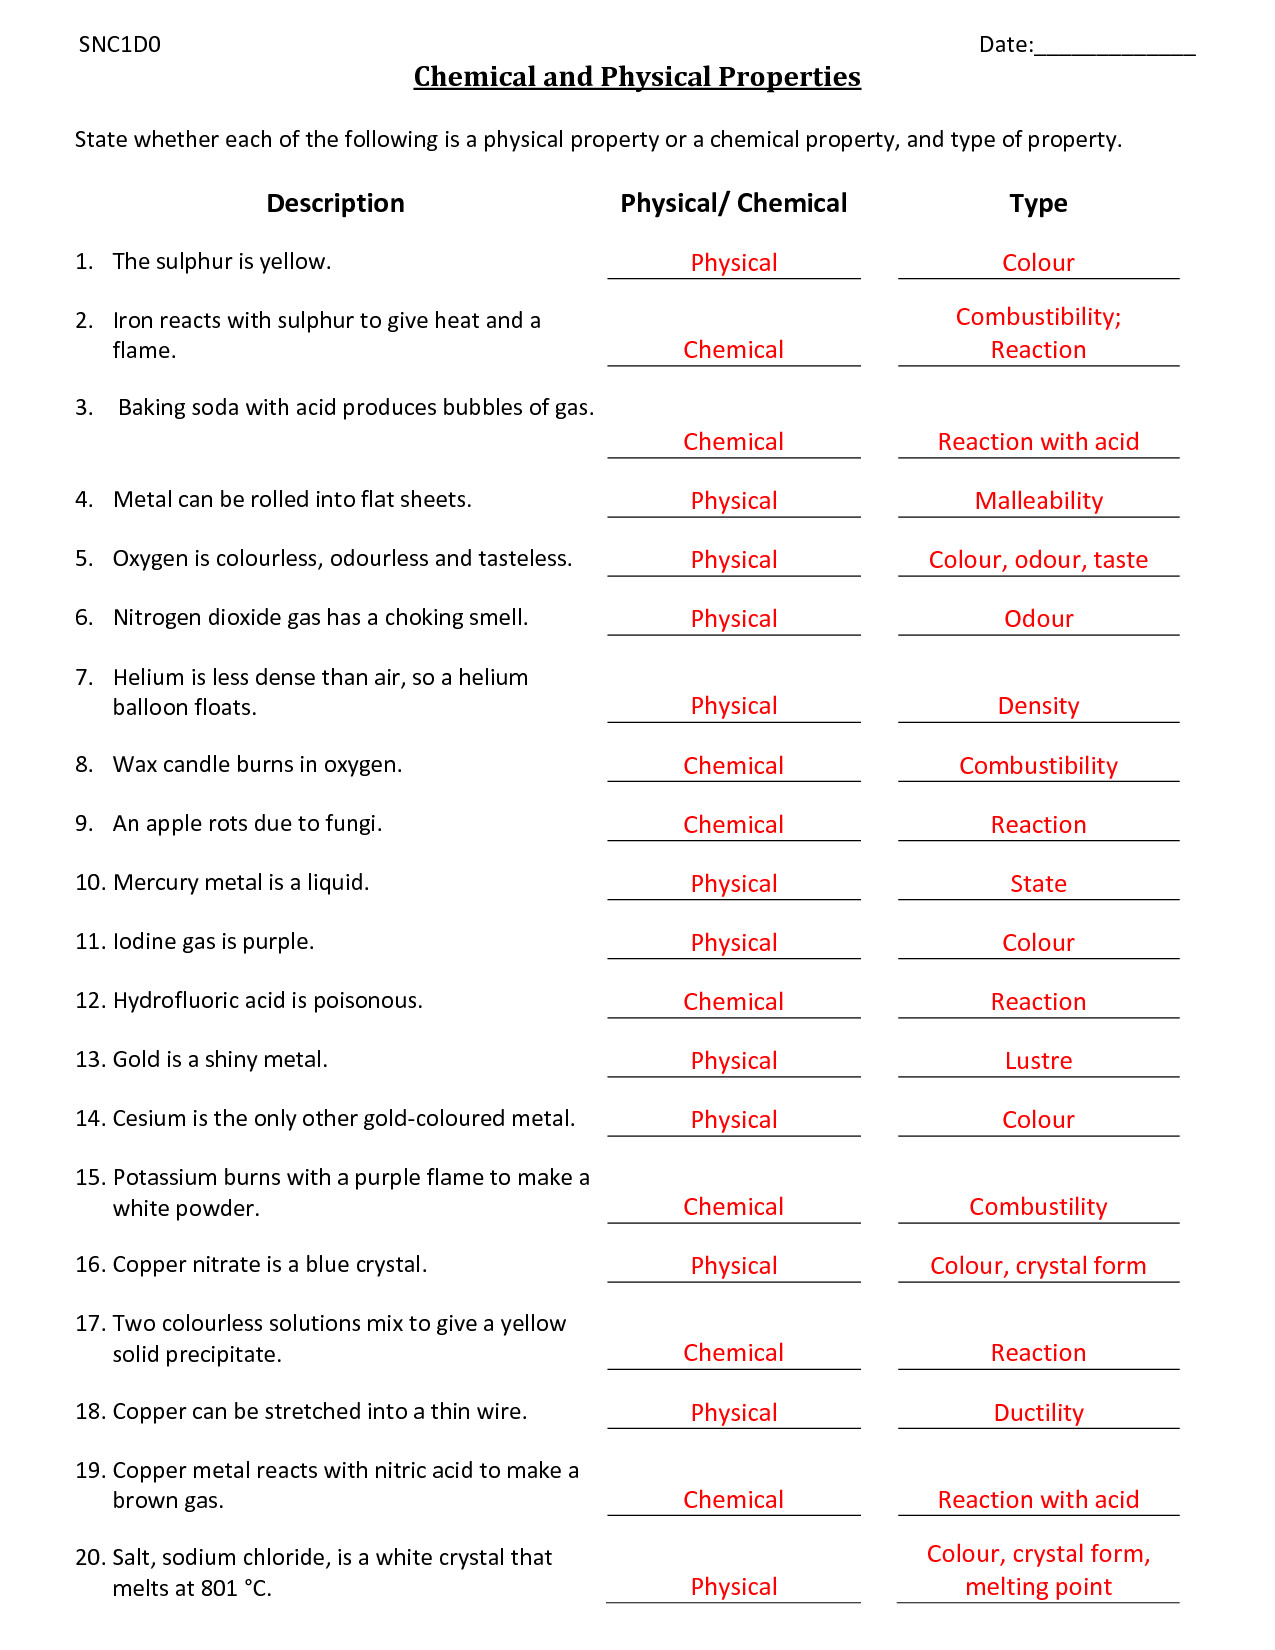 Chemical and Physical Changes Worksheet Lovely Physical Vs Chemical Properties Worksheet Answers